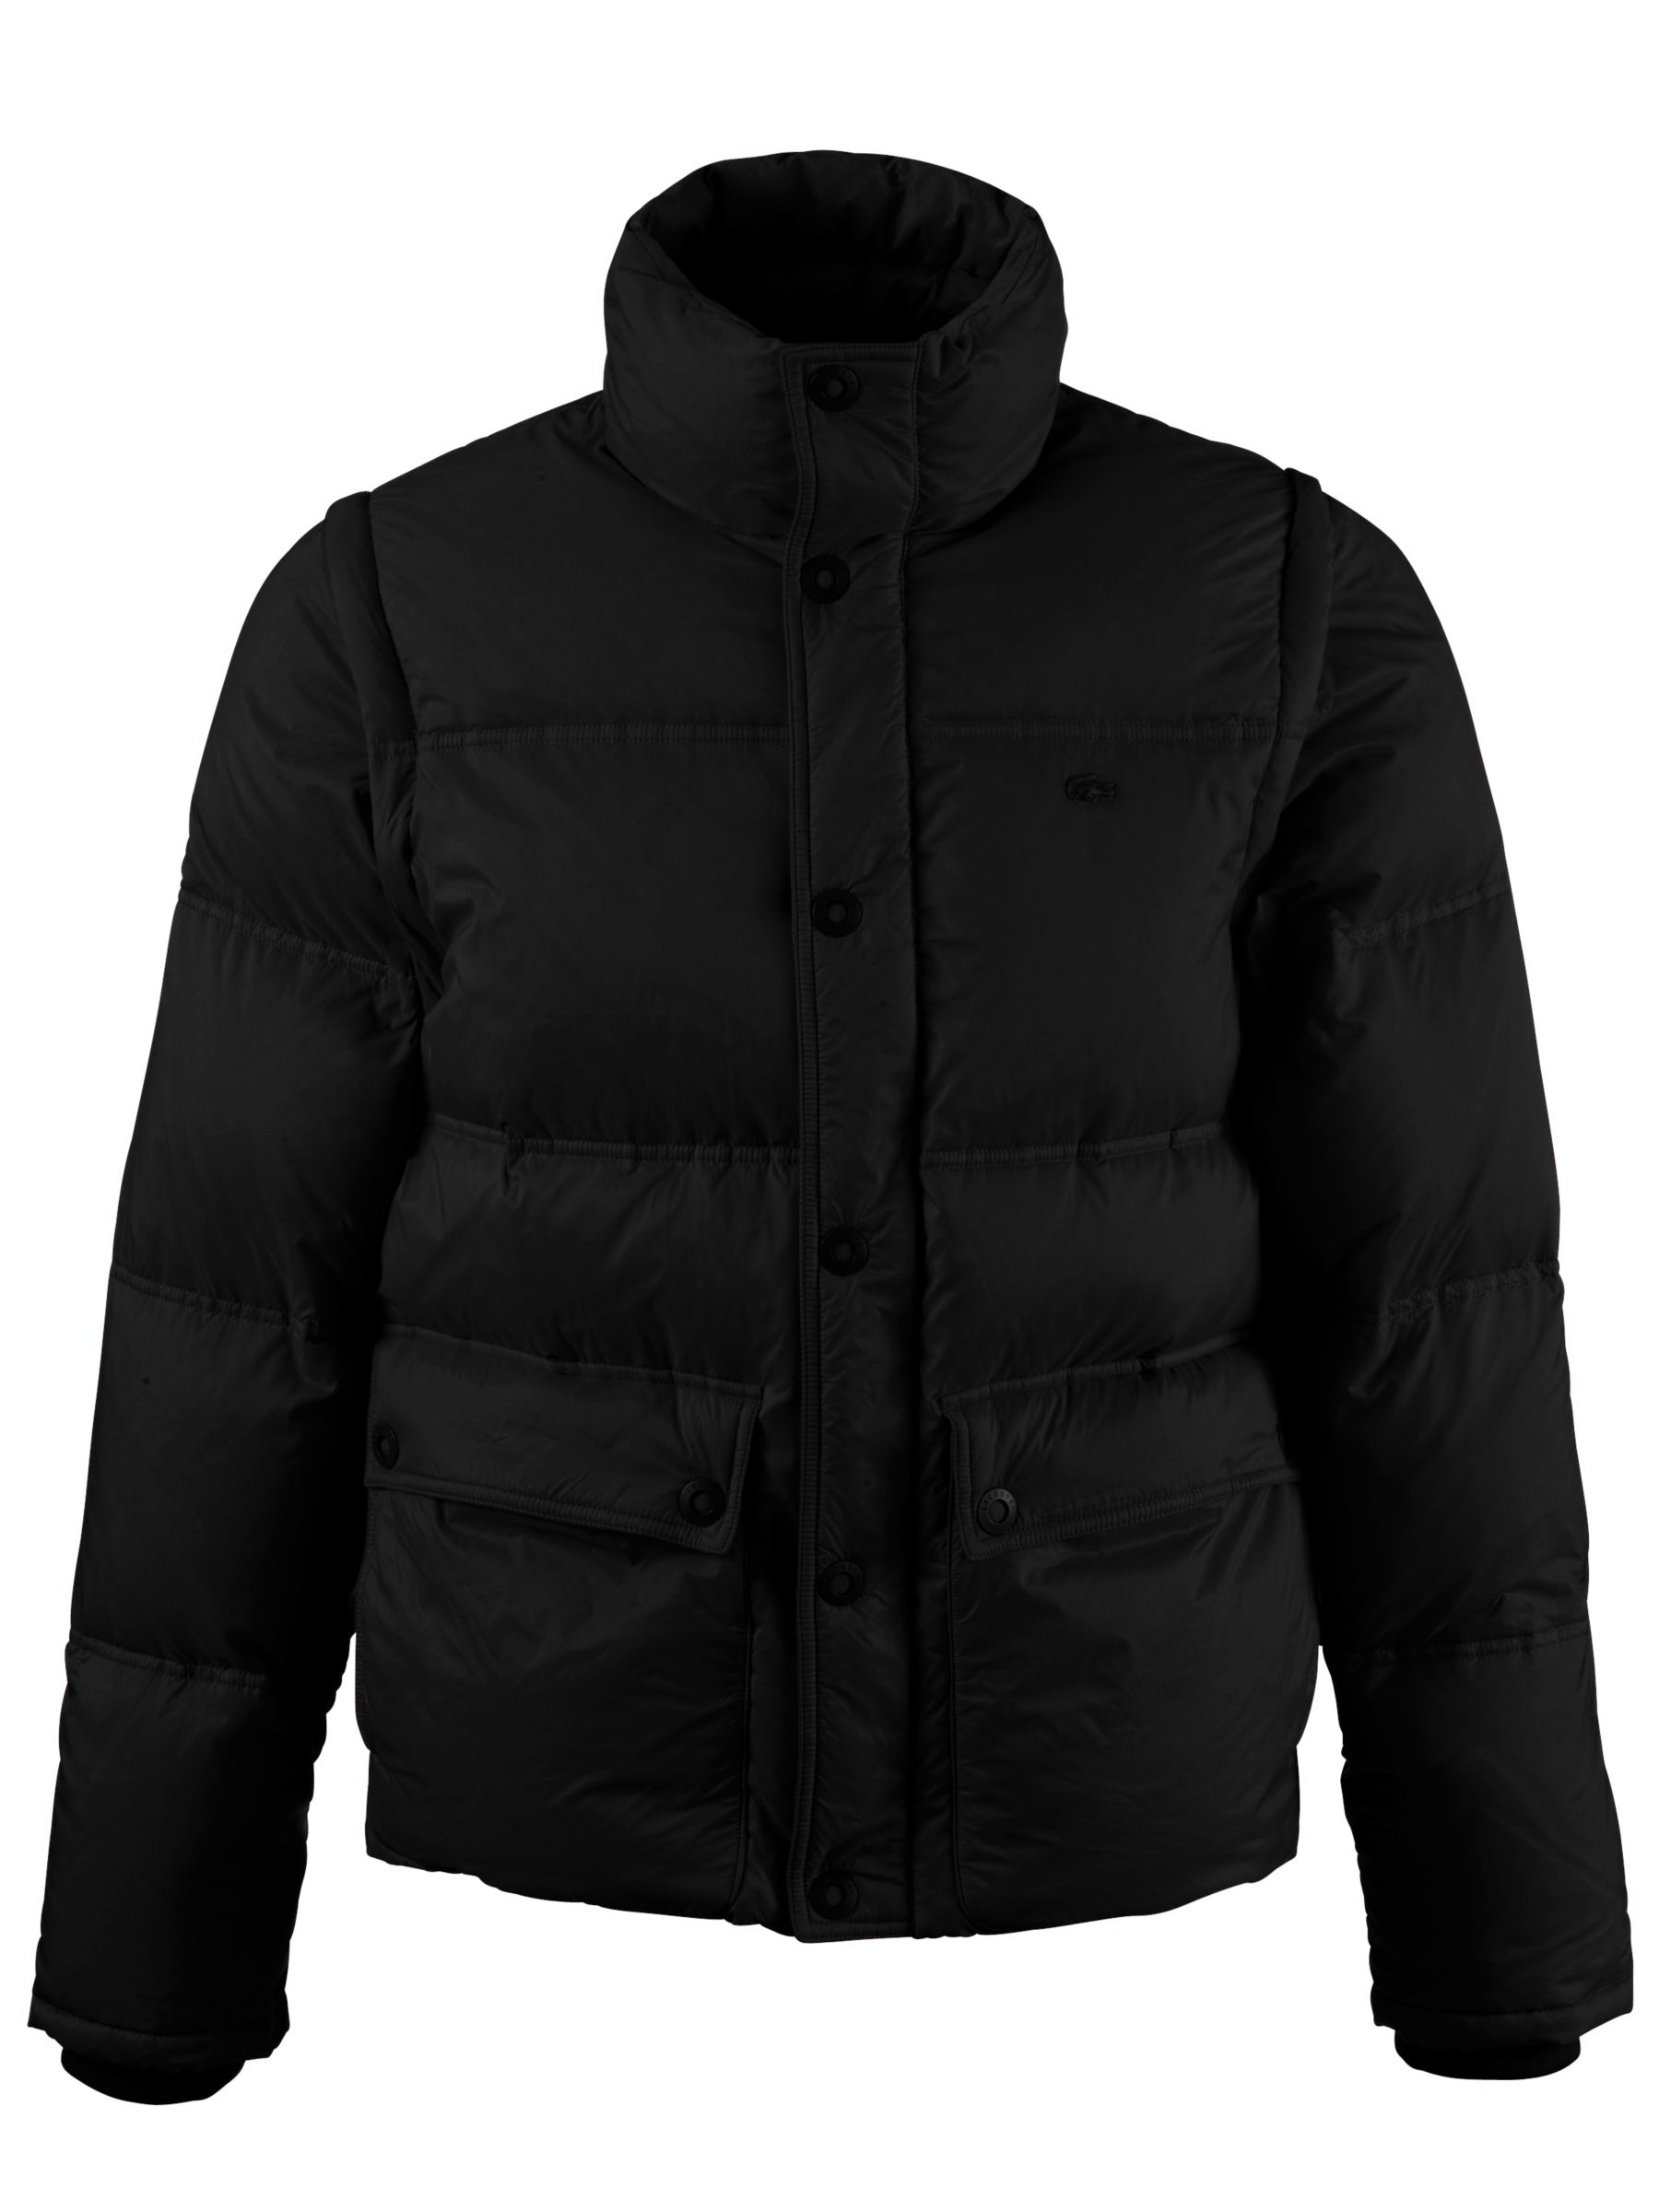 Lacoste Duck Down 2-in-1 Puffer Jacket, Black at JohnLewis